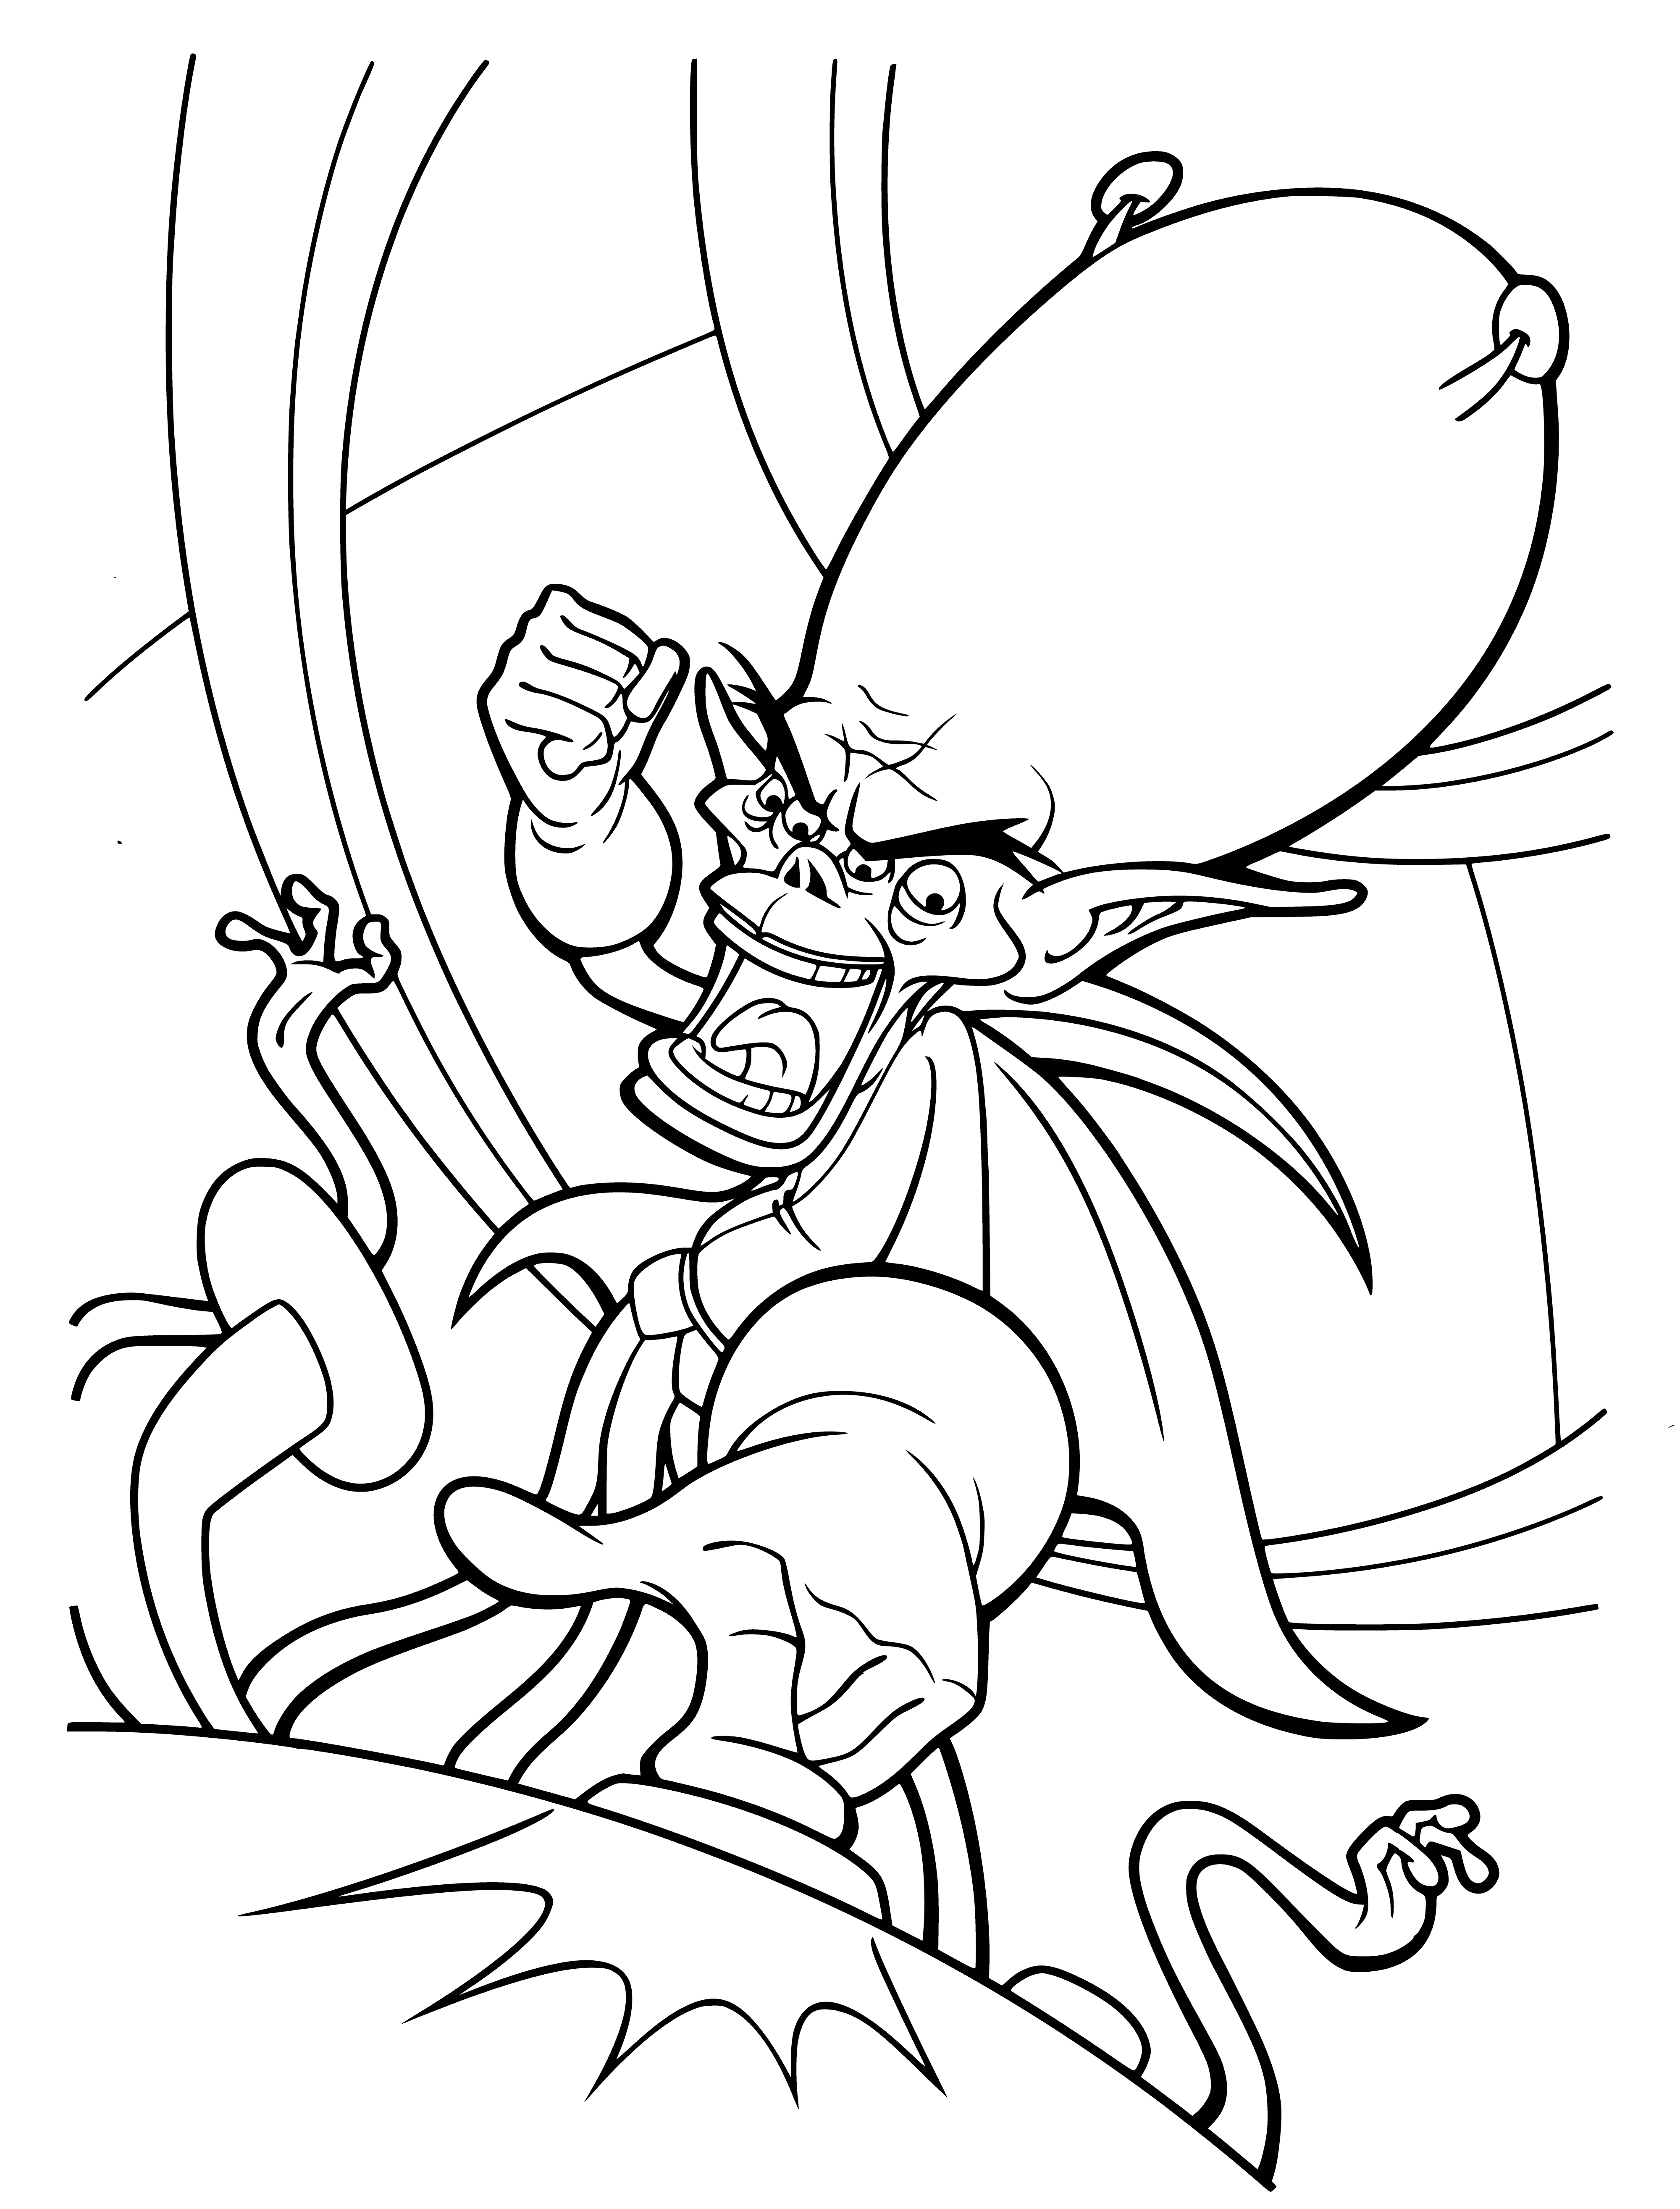 The main villain coloring page